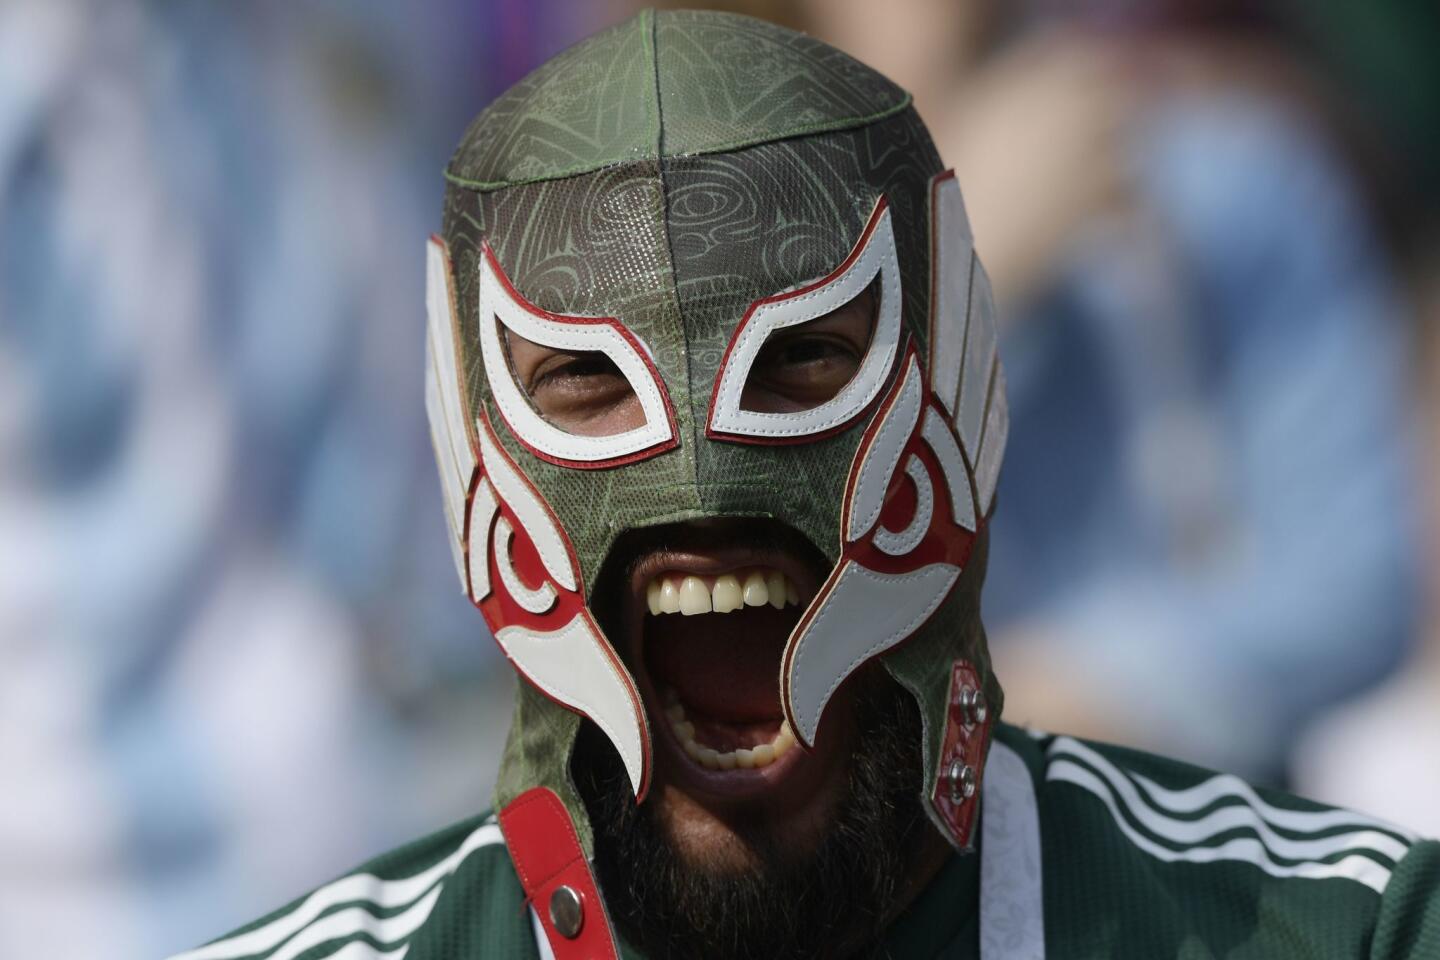 A Mexico supporter poses prior to the Russia 2018 World Cup Group F football match between Germany and Mexico at the Luzhniki Stadium in Moscow on June 17, 2018.